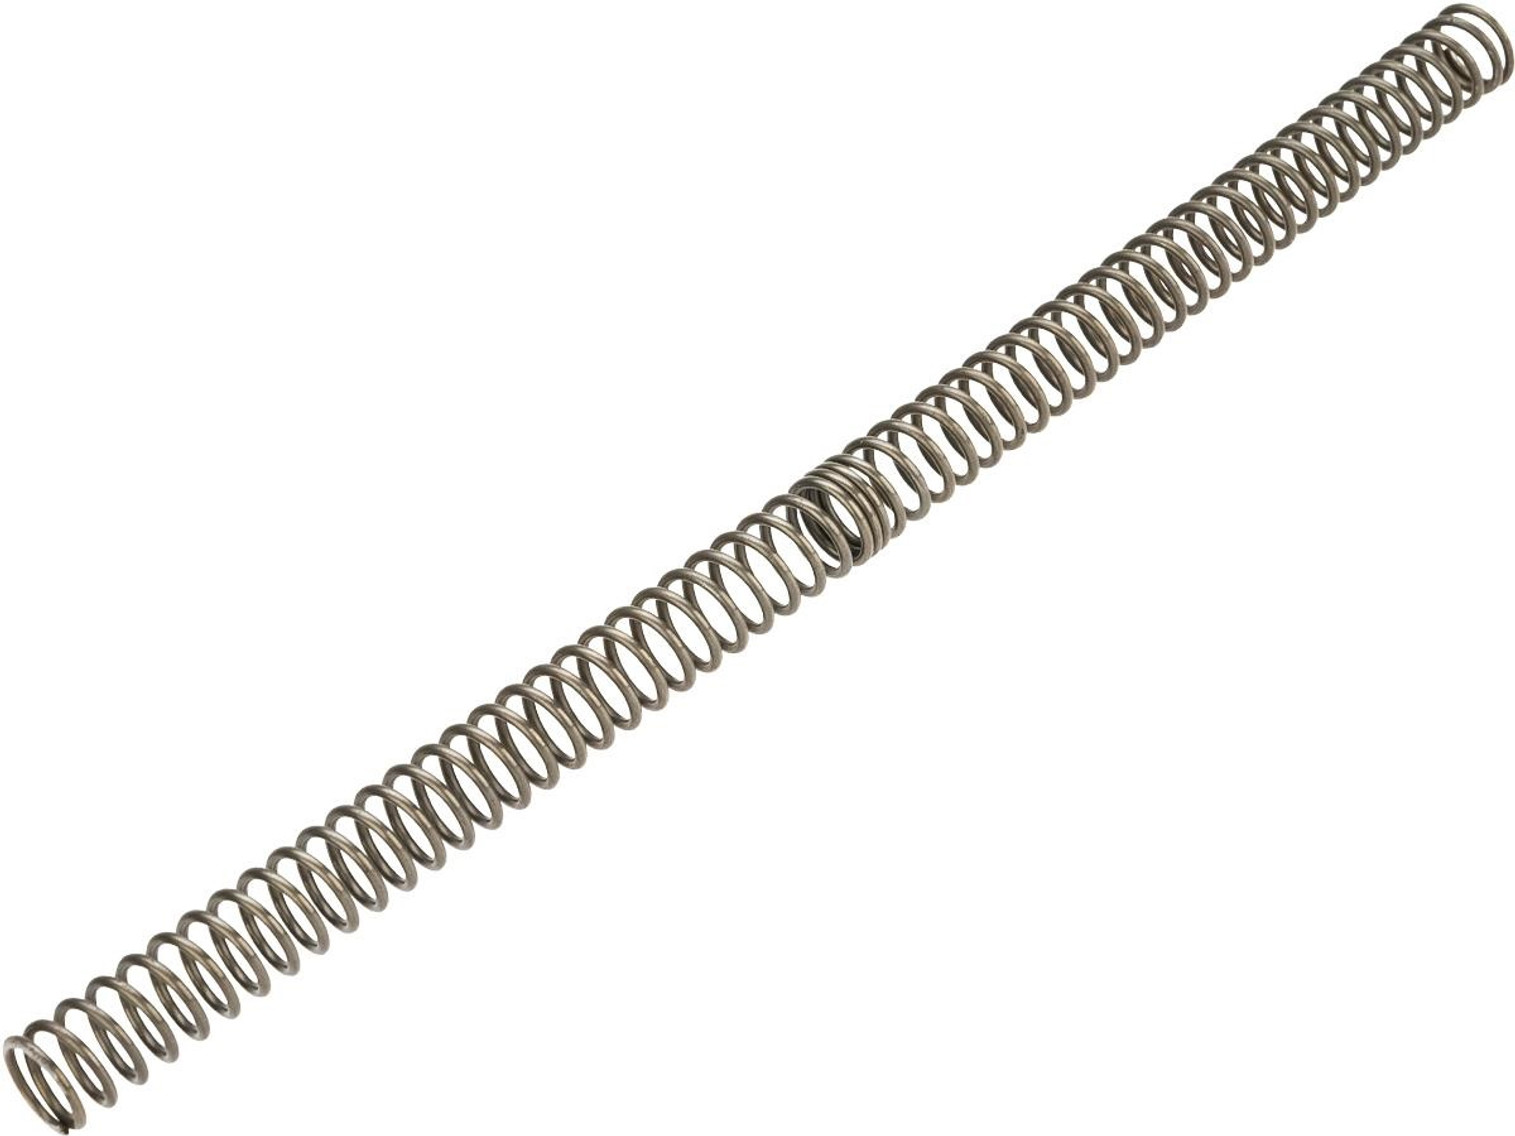 Silverback Airsoft APS 13mm Type Spring for Desert Tech SRS-A1